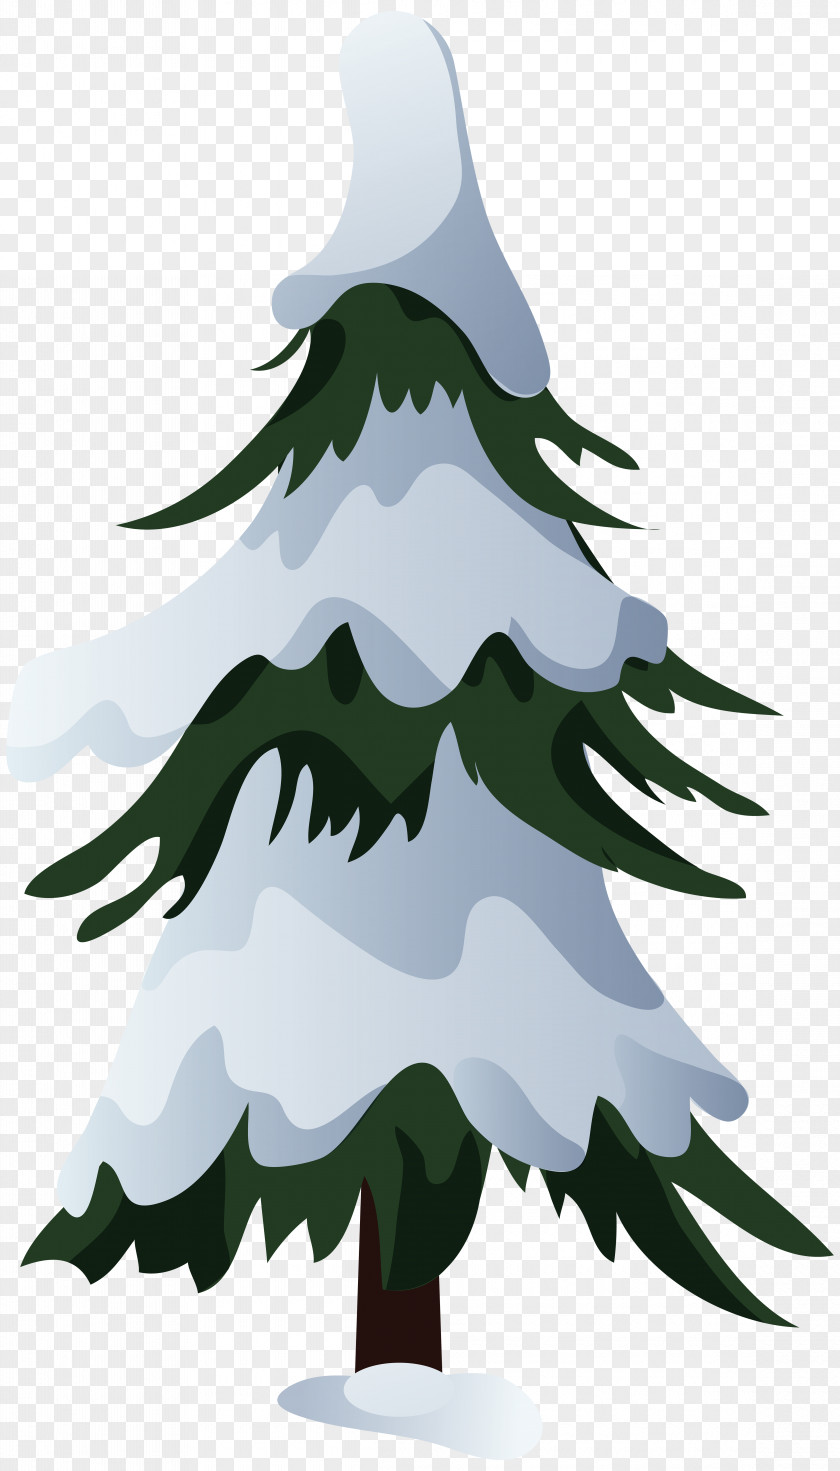 Snowy Pine Tree Clip Art Snow Android Mobile App Wallpaper PNG